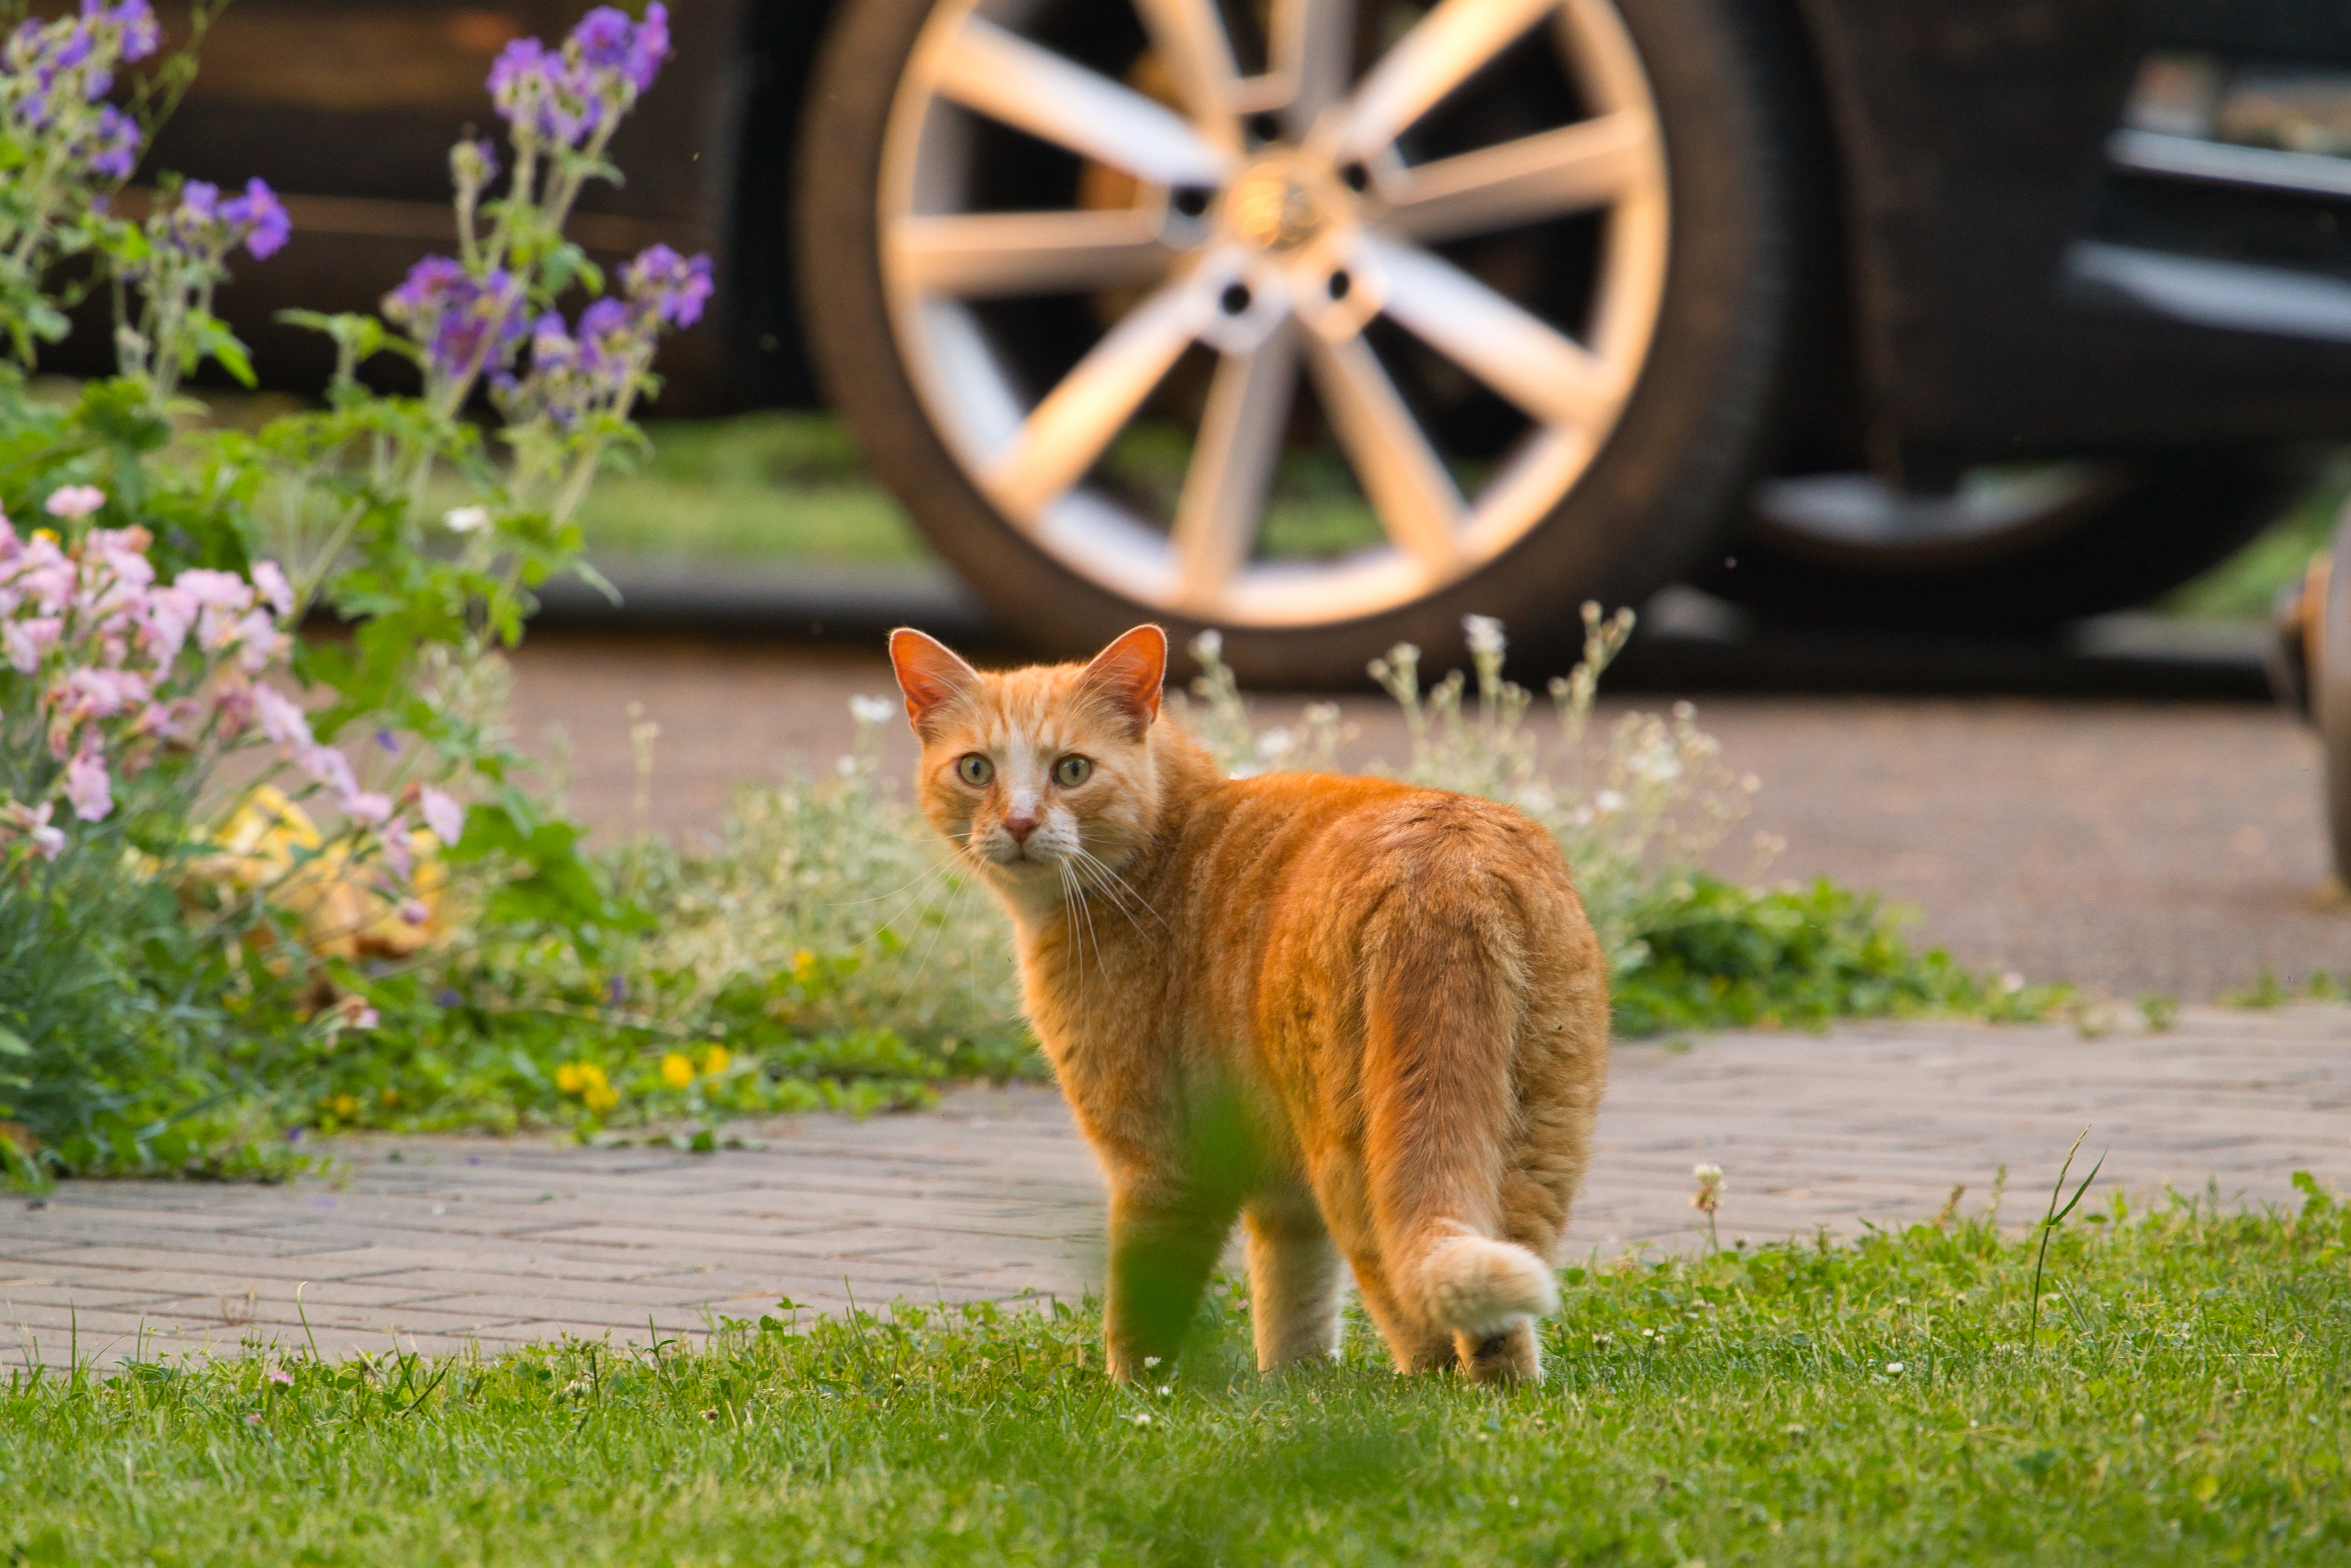 Ginger cat roaming freely in a grassy patch